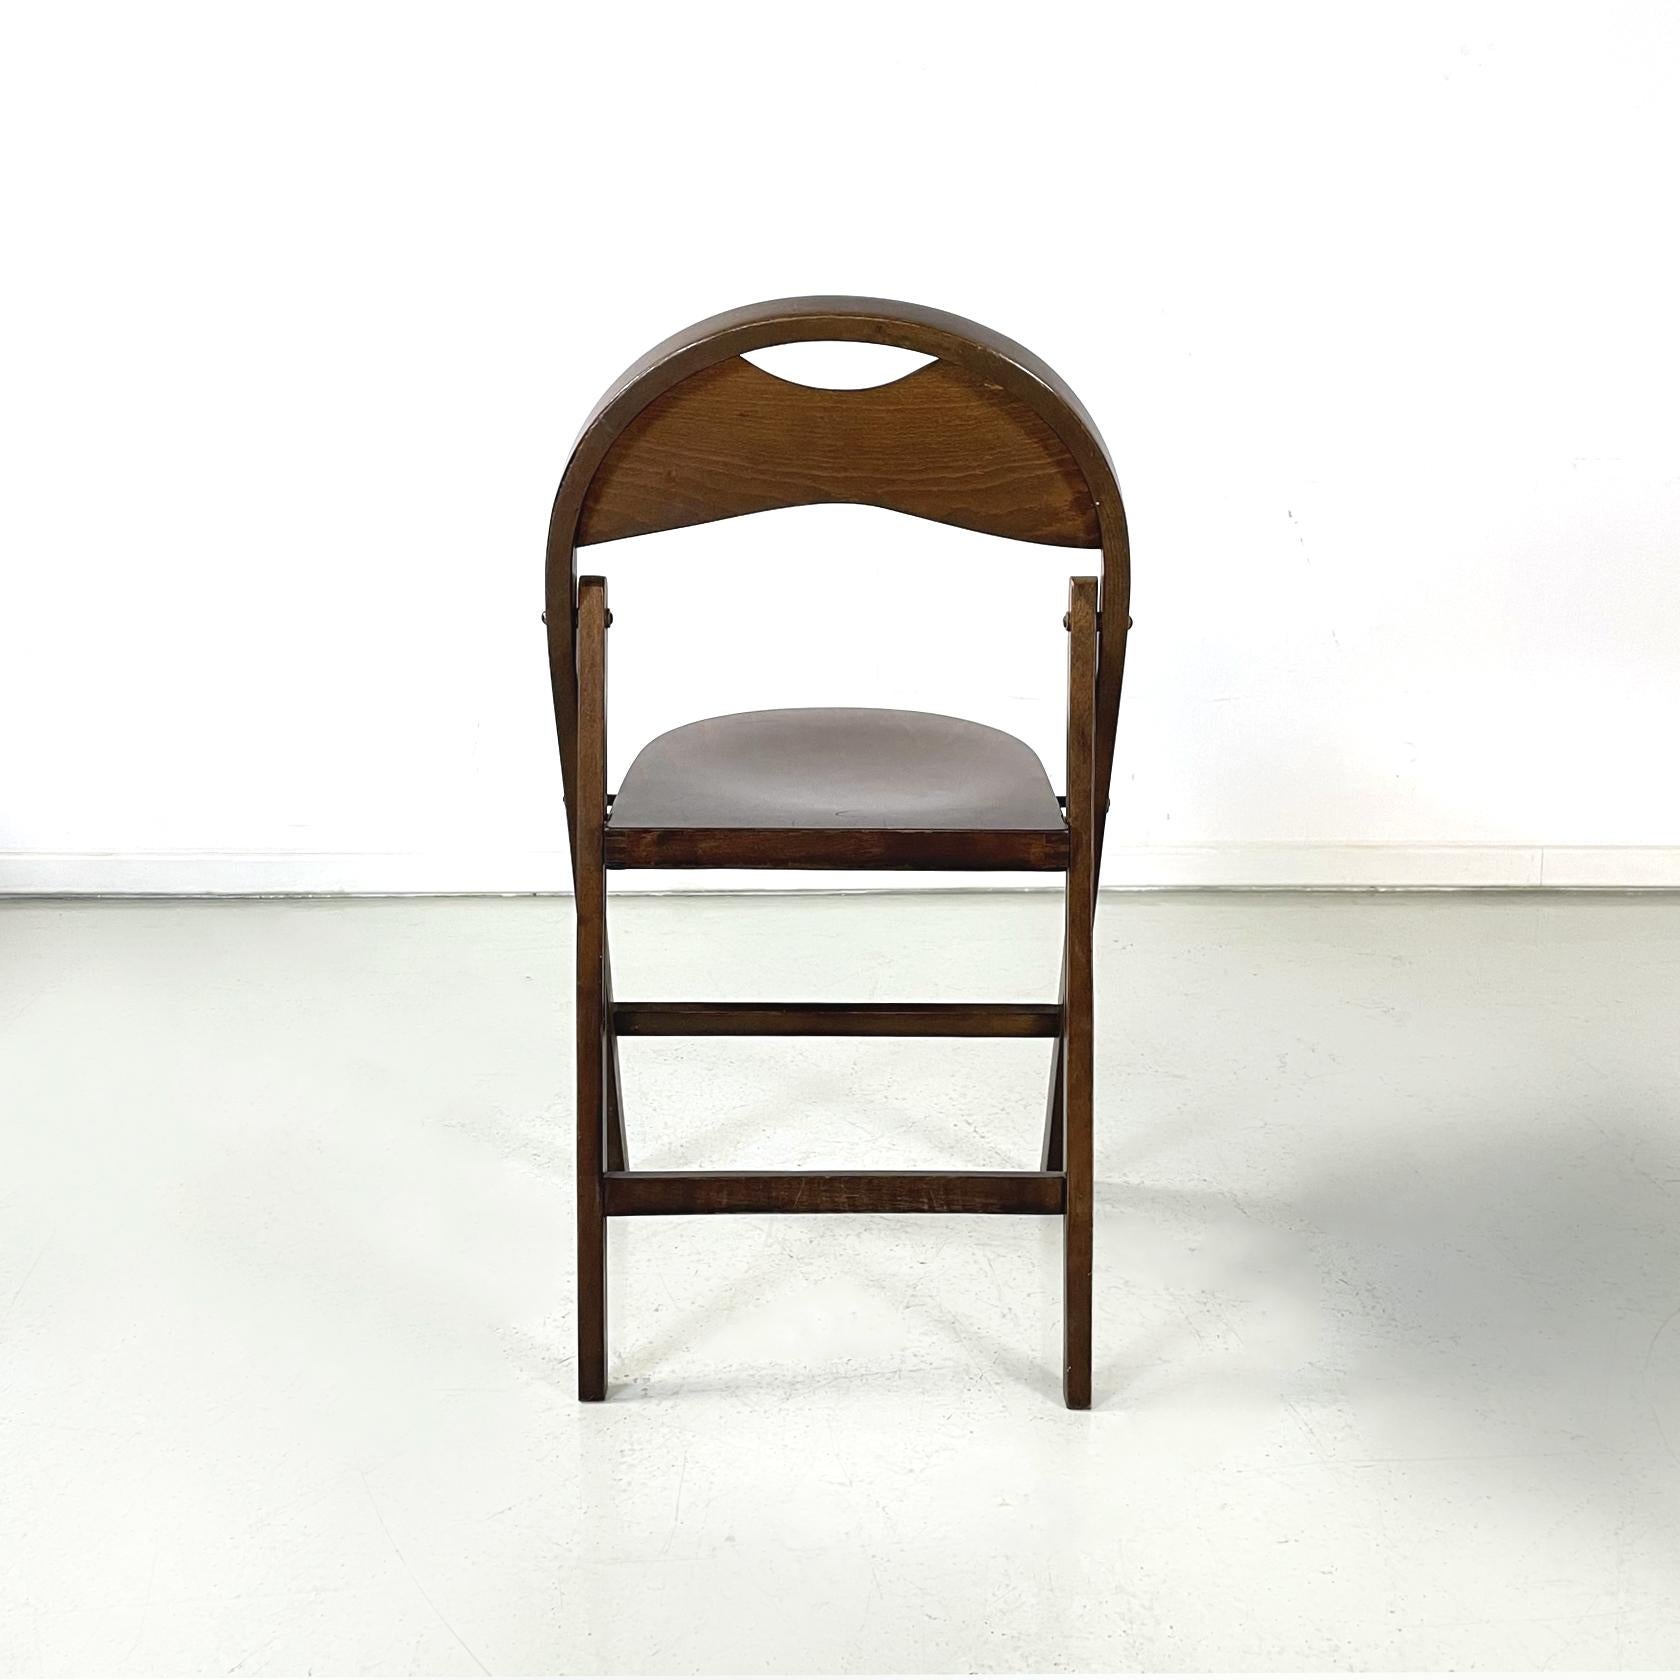 Mid-20th Century Italian Midcentury Wooden Folding Chairs Tric by Castiglioni, 1960s